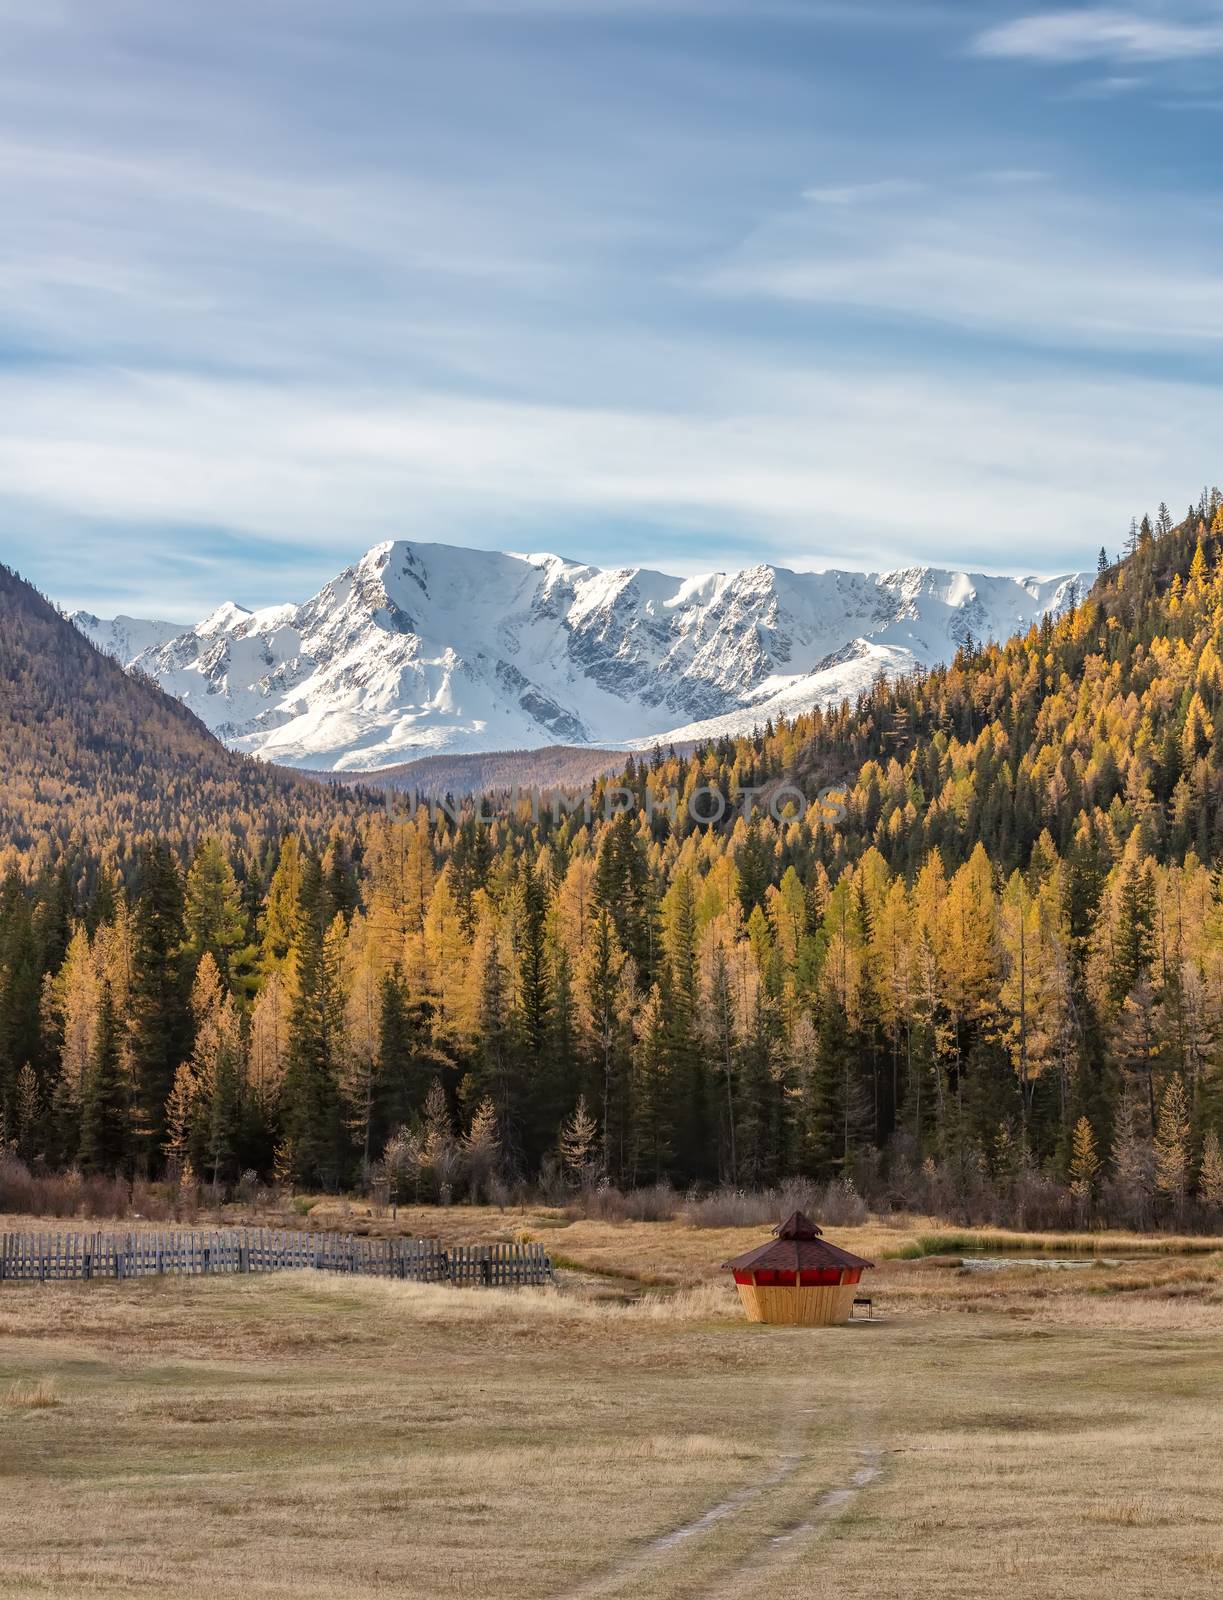 Scenic low angle view of snowy mountain peaks and slopes of North Chuyskiy ridge. Golden trees, wooden hut in the foreground. Beautiful blue cloudy sky as a backdrop. Altai mountains, Siberia, Russia by DamantisZ